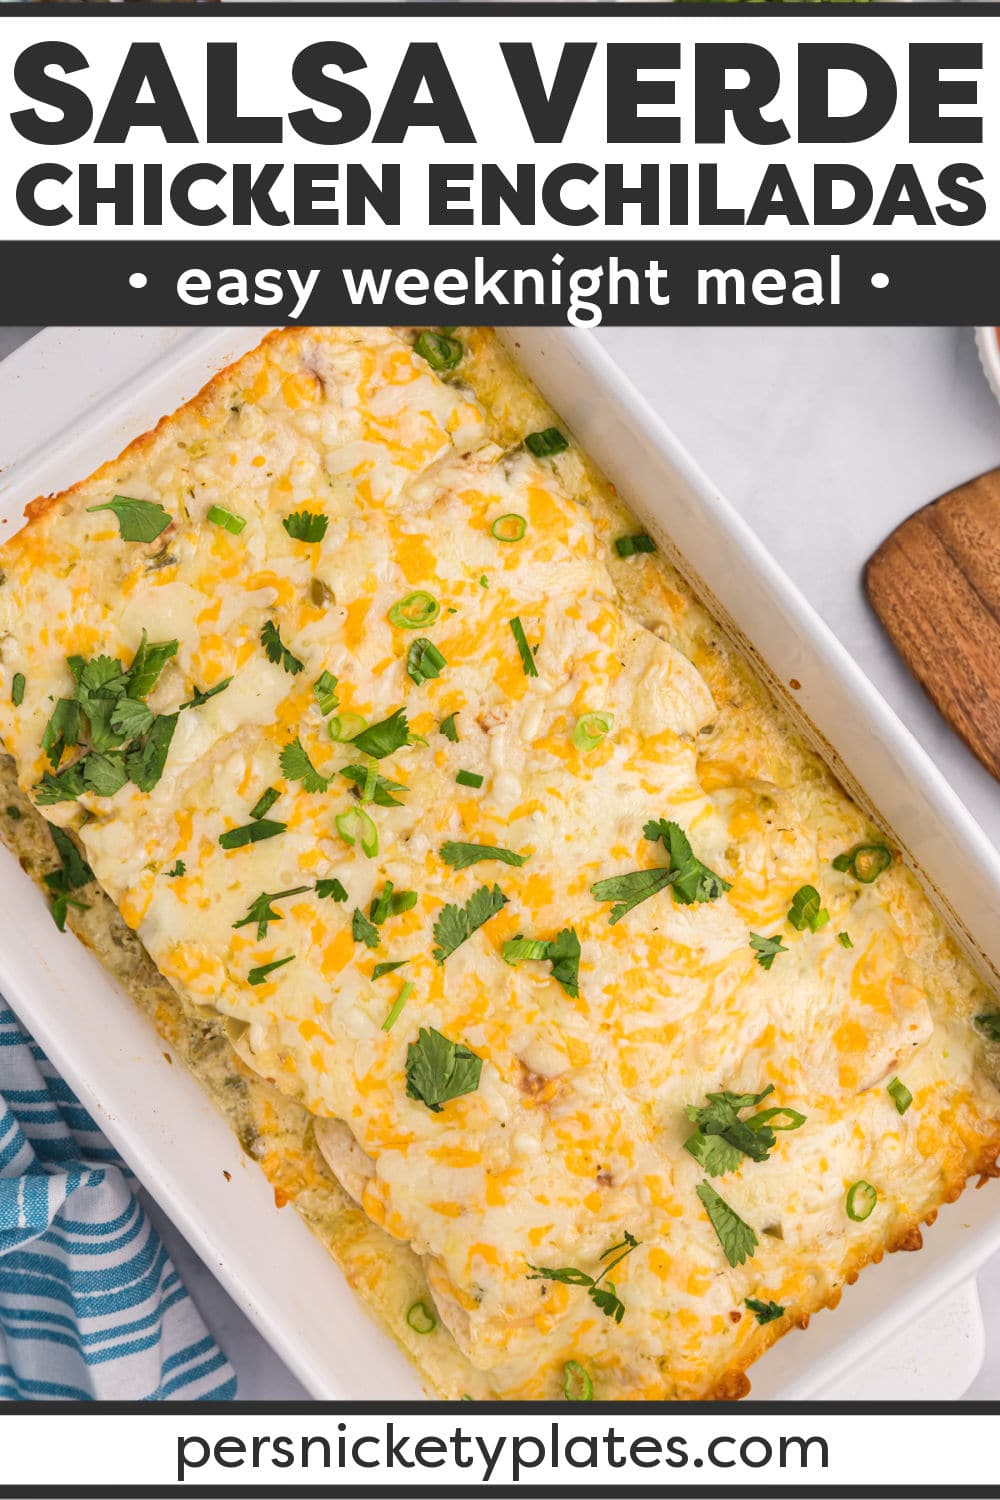 Fresh and flavorful salsa verde chicken enchiladas are made with tortillas stuffed with a creamy and vibrant salsa verde sauce, tender shredded chicken and shredded cheese then baked with even more melty cheese on top. It’s the perfect easy dinner idea that can be made ahead and popped in the oven any night of the week!